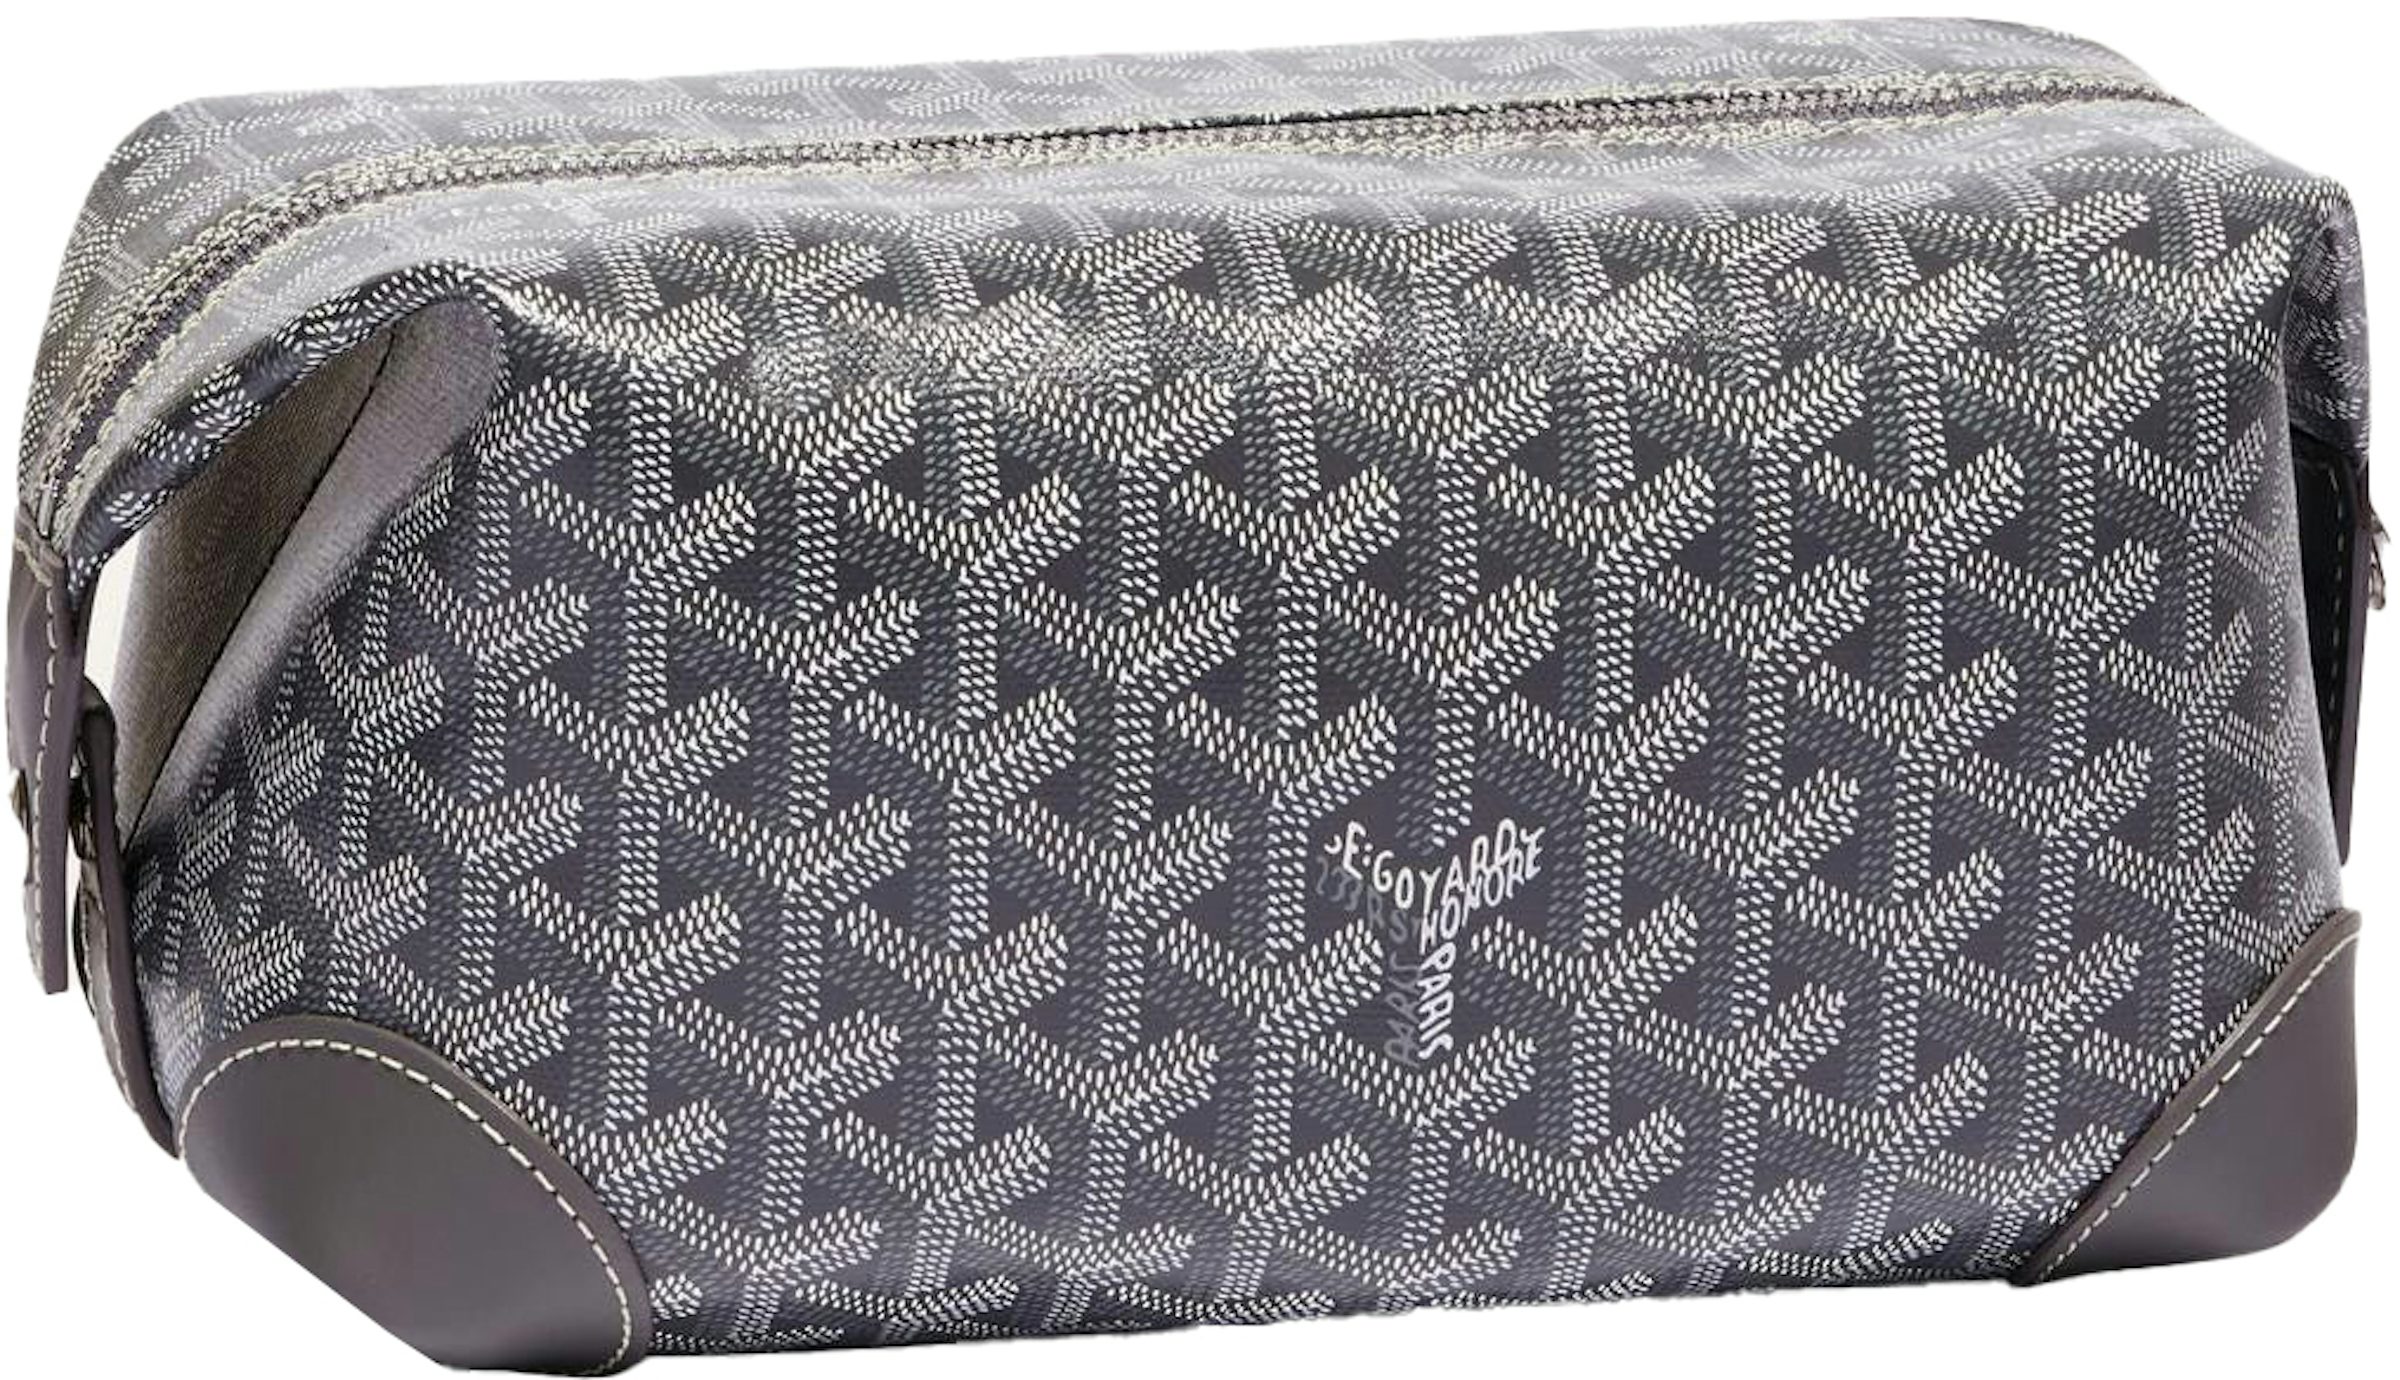 Buy Goyard Tote Bags, Wallets and More - StockX